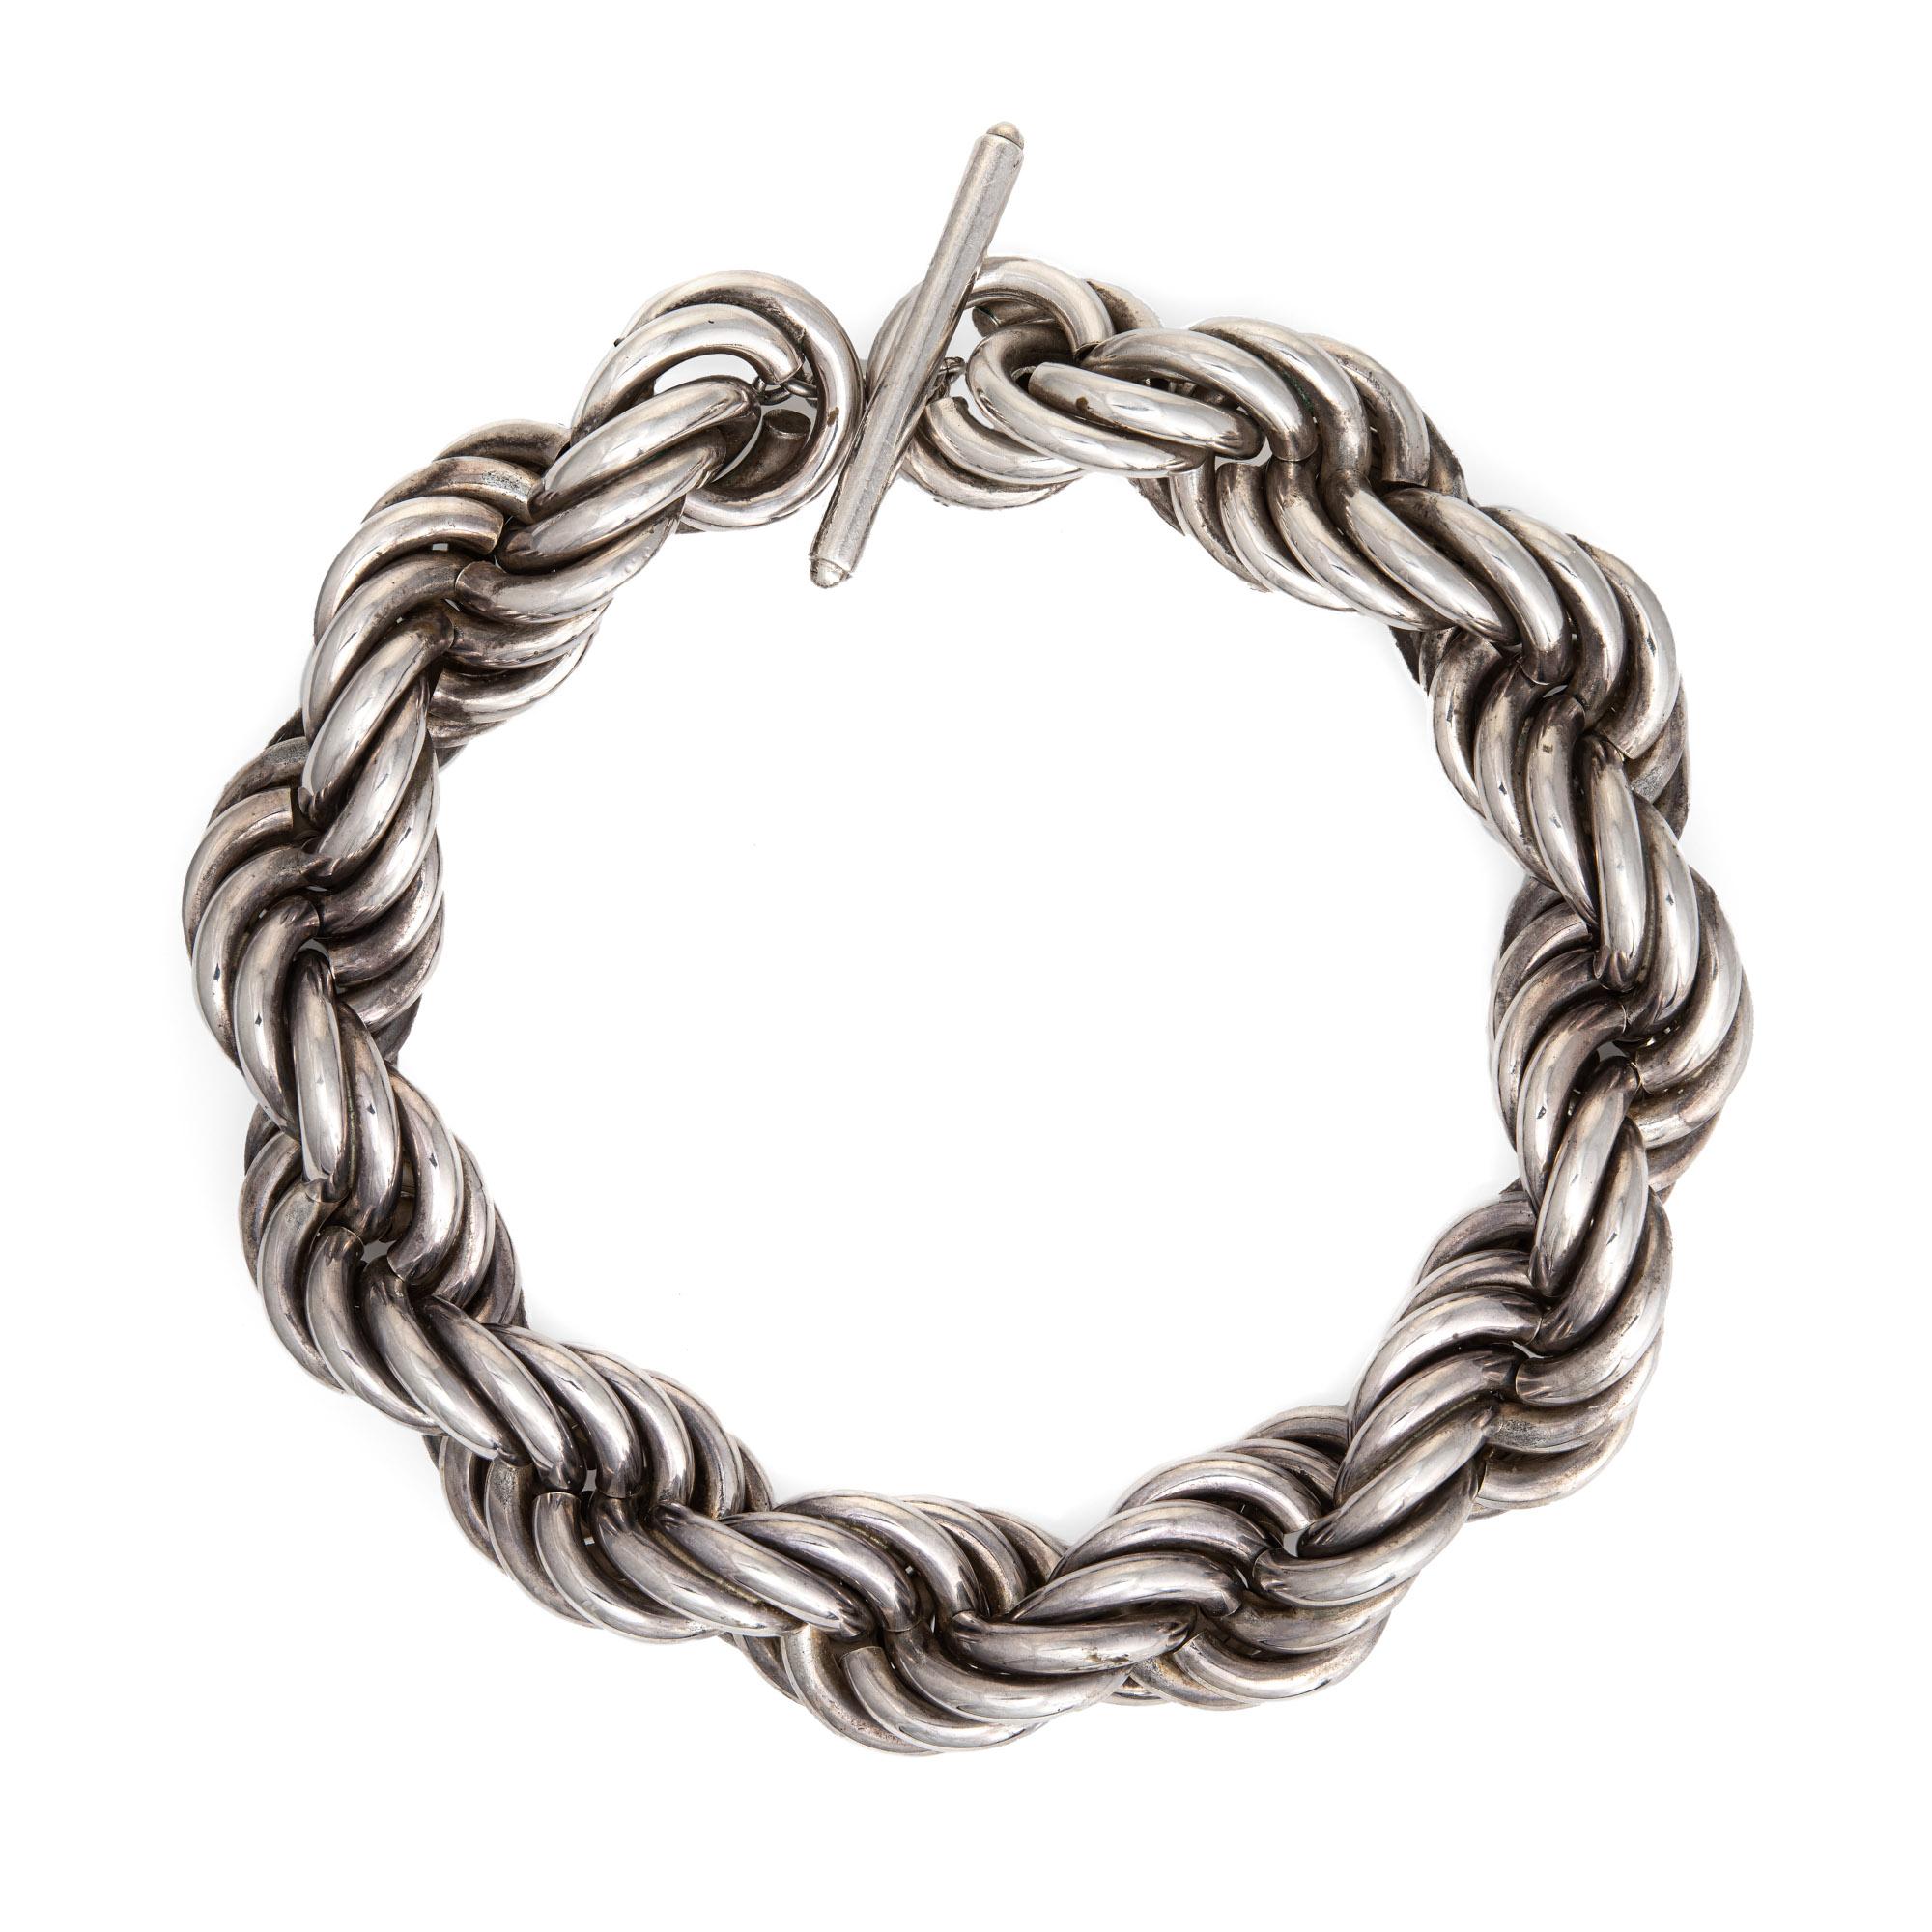 Stylish and finely detailed massive vintage Tiffany & Co rope link necklace crafted in sterling silver (circa 1950s to 1960s).  

The large, oversized rope link necklace measures a wide 28mm (1.10 inches). The statement necklace measures 16 inches